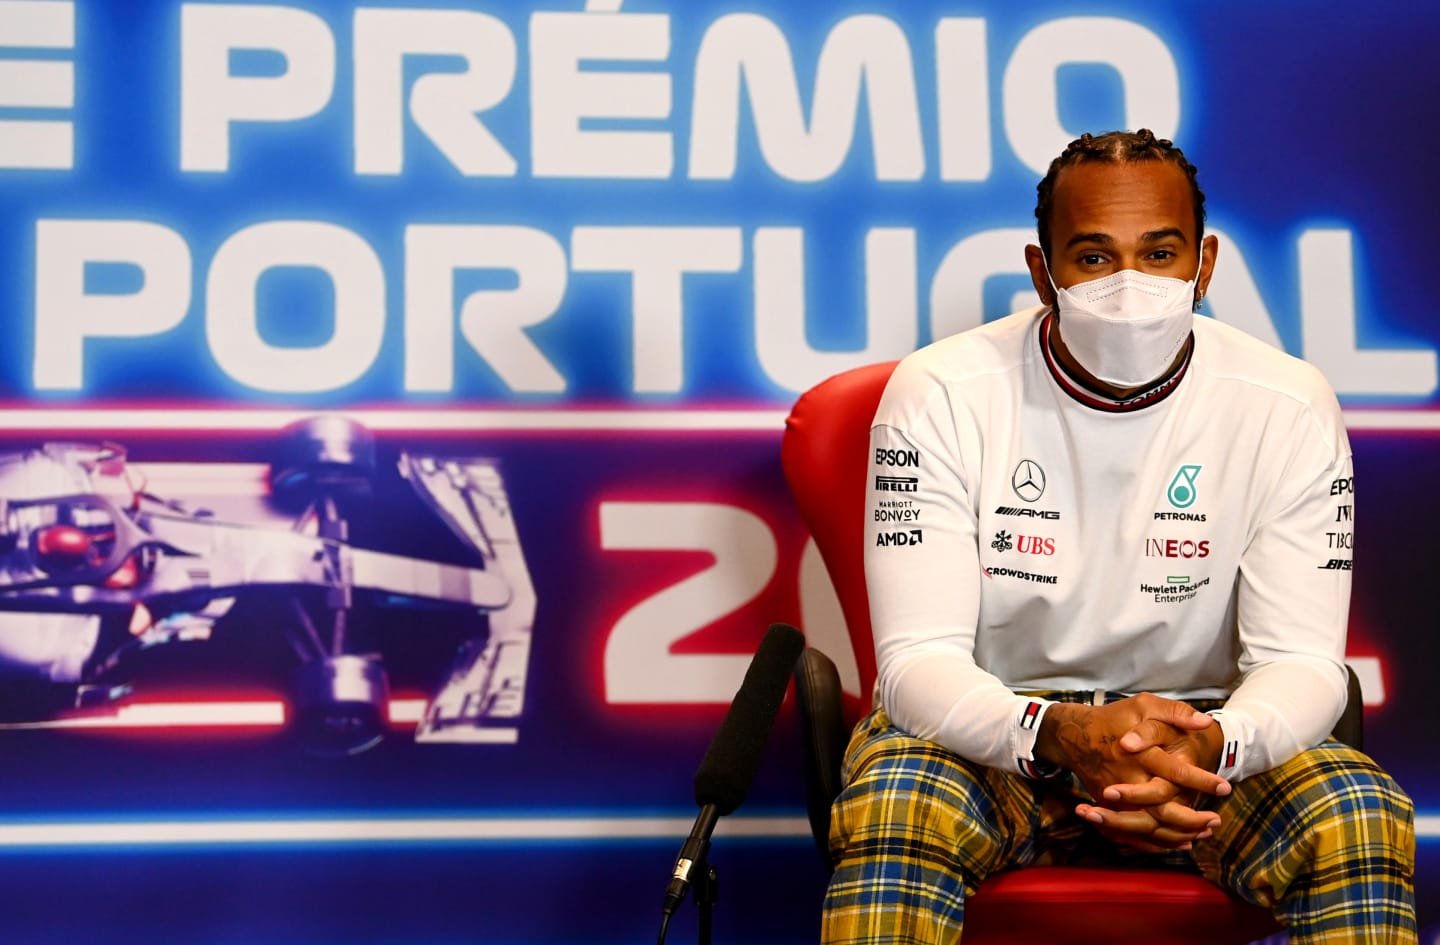 PORTIMAO, PORTUGAL - APRIL 29: Lewis Hamilton of Great Britain and Mercedes GP talks in the Drivers